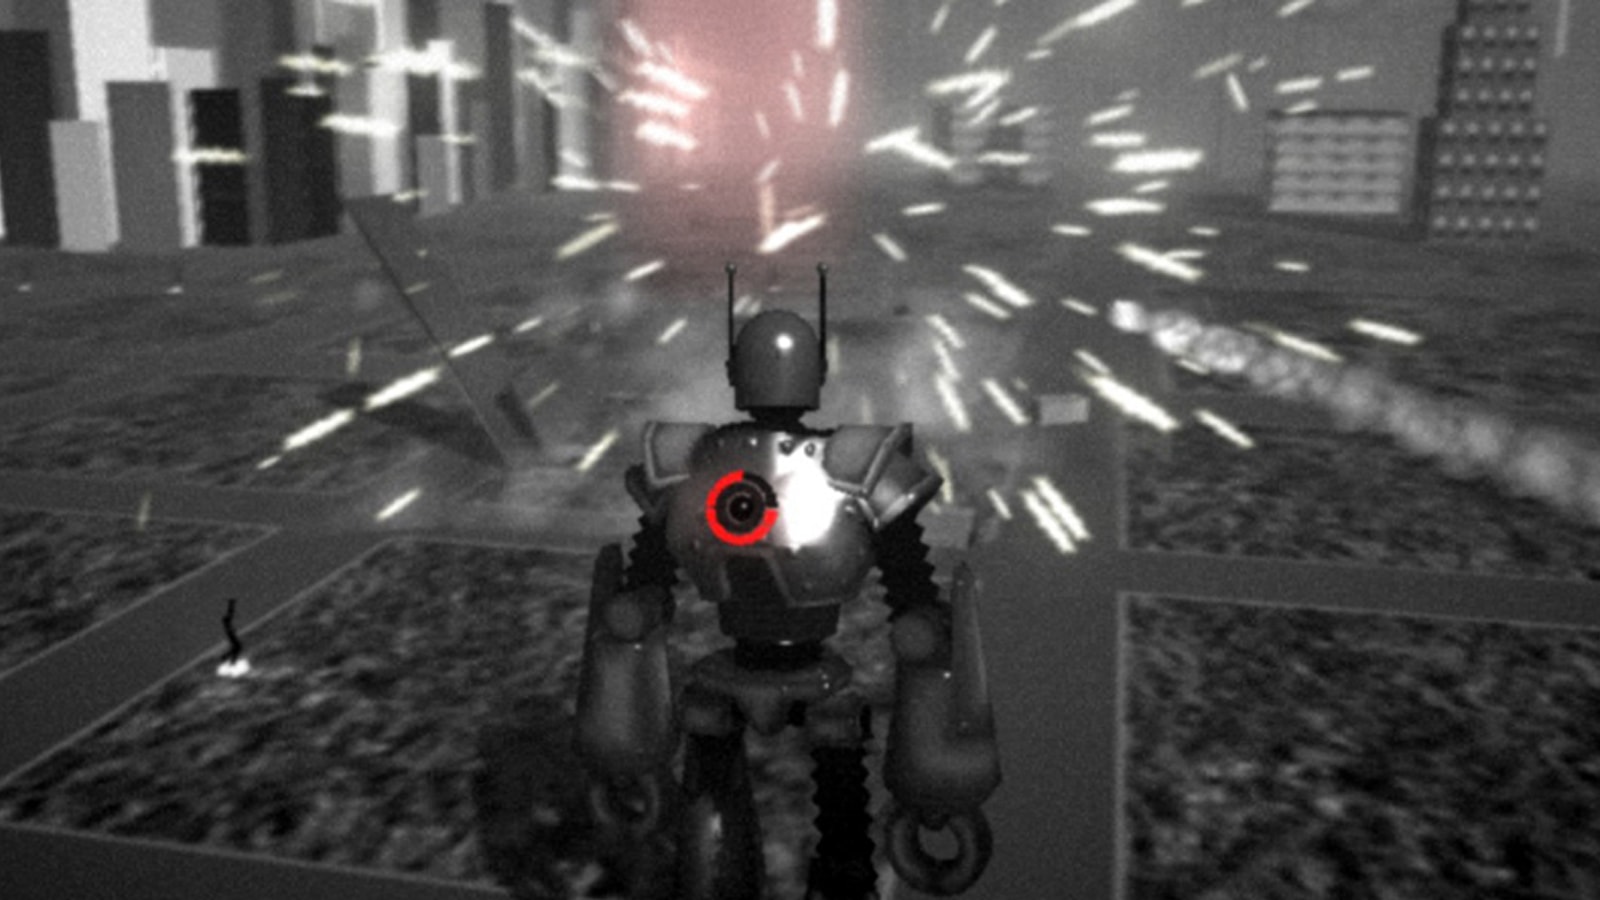 The backside of a large robot with two claw-like hands and a red light-up meter on it.